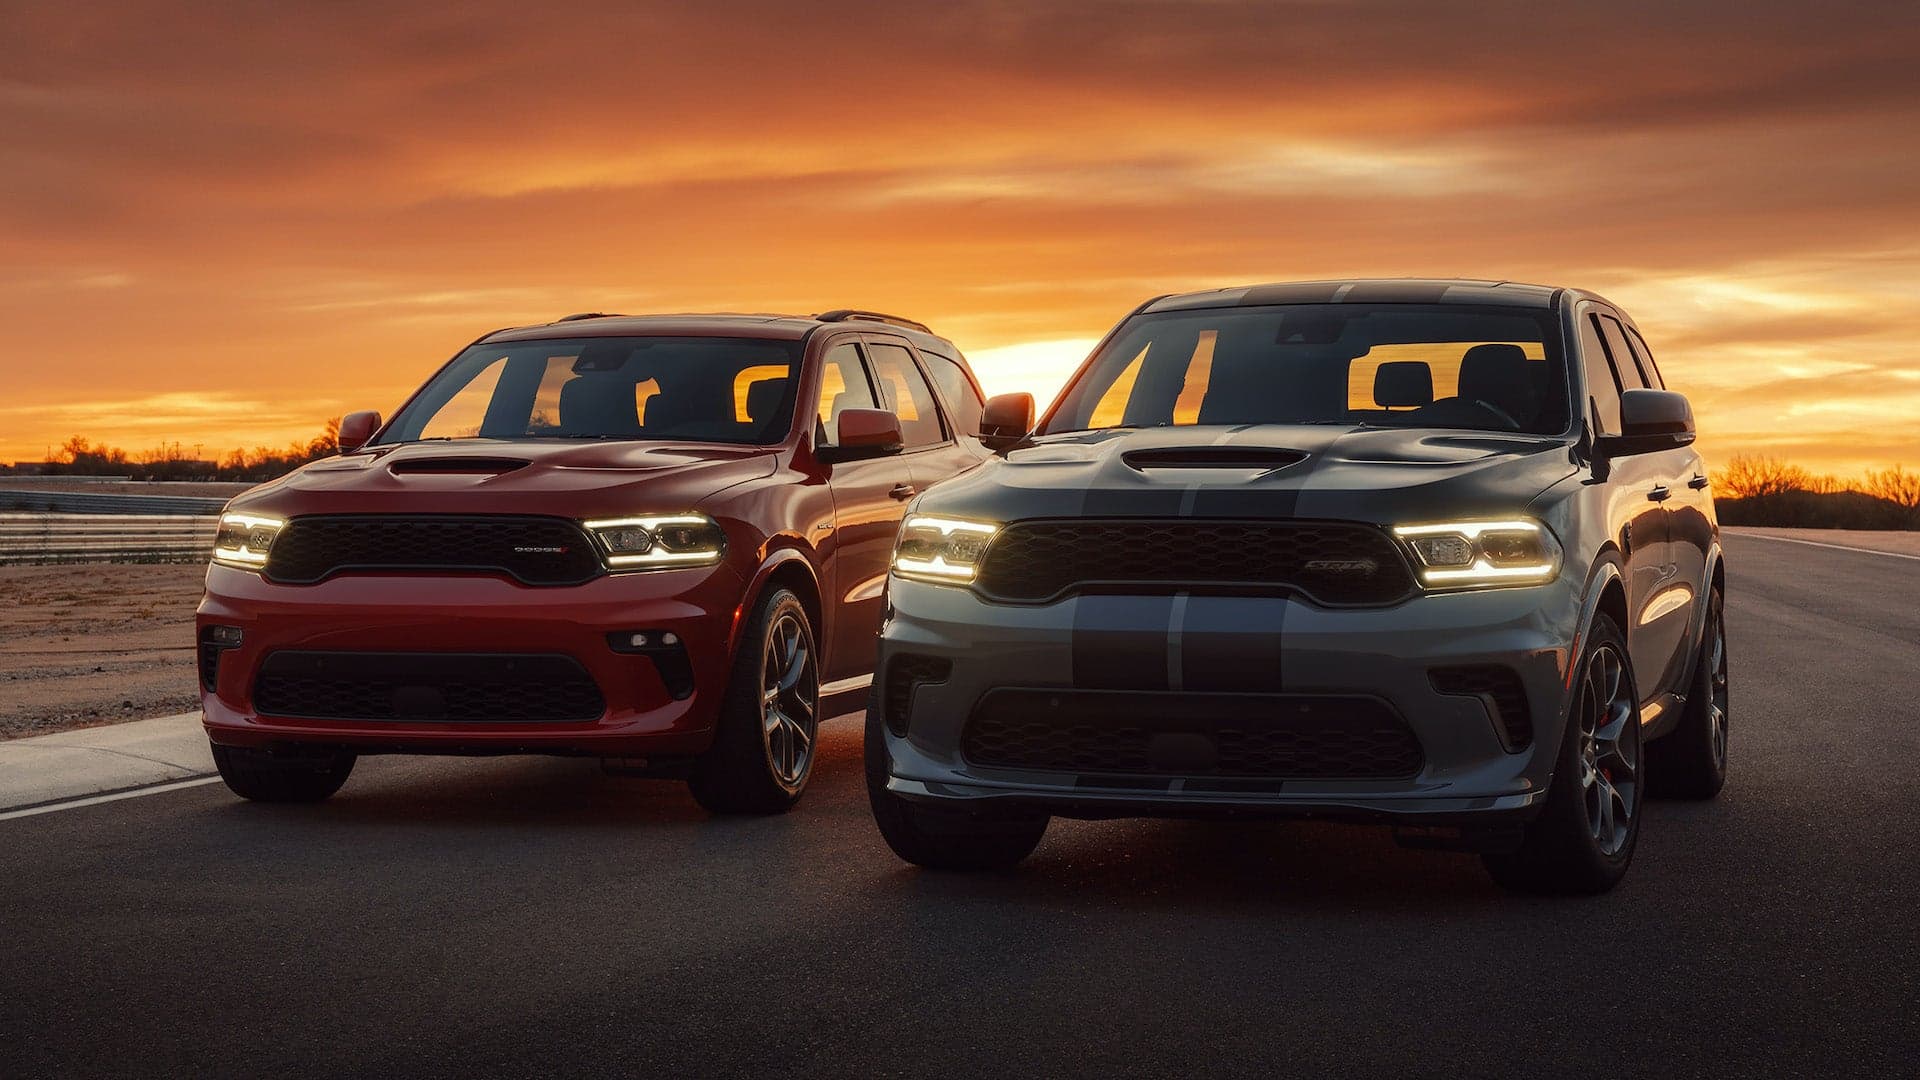 2021 Dodge Durango SRT Hellcat Starts at $81,000 With Under 2,000 Units Planned: Report